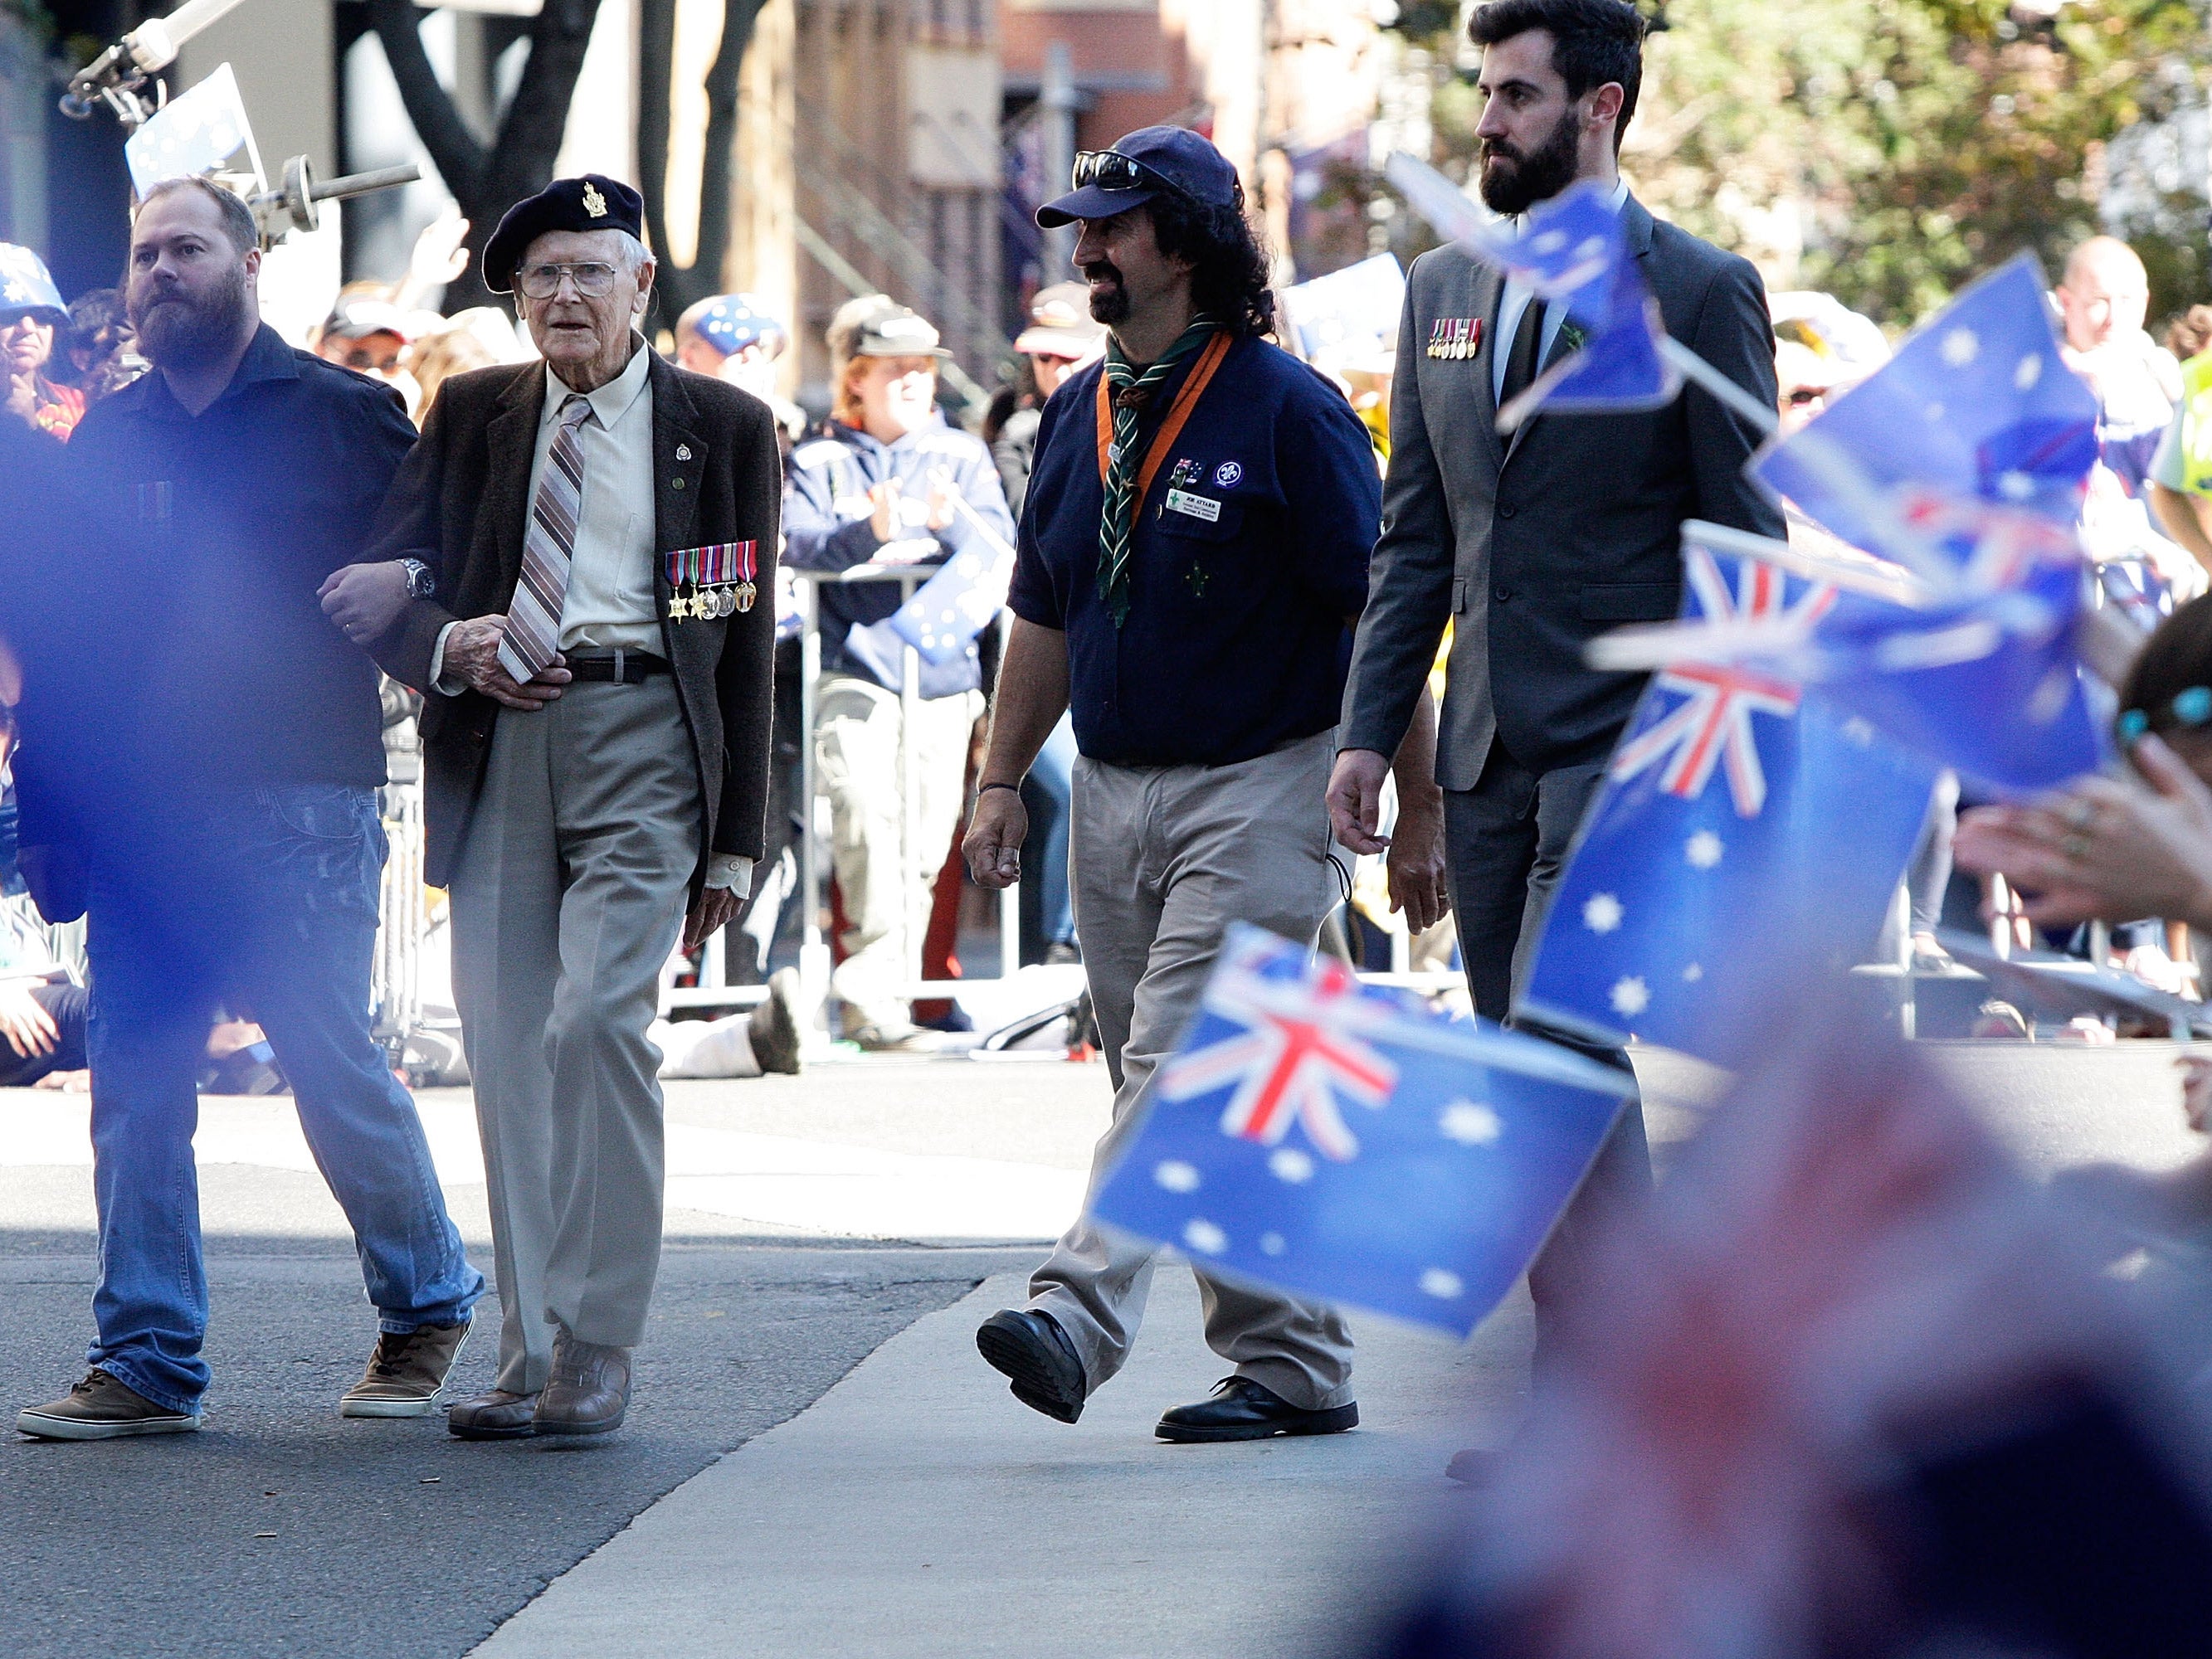 The attack was intended to be carried out during an Anzac day parade in Australia